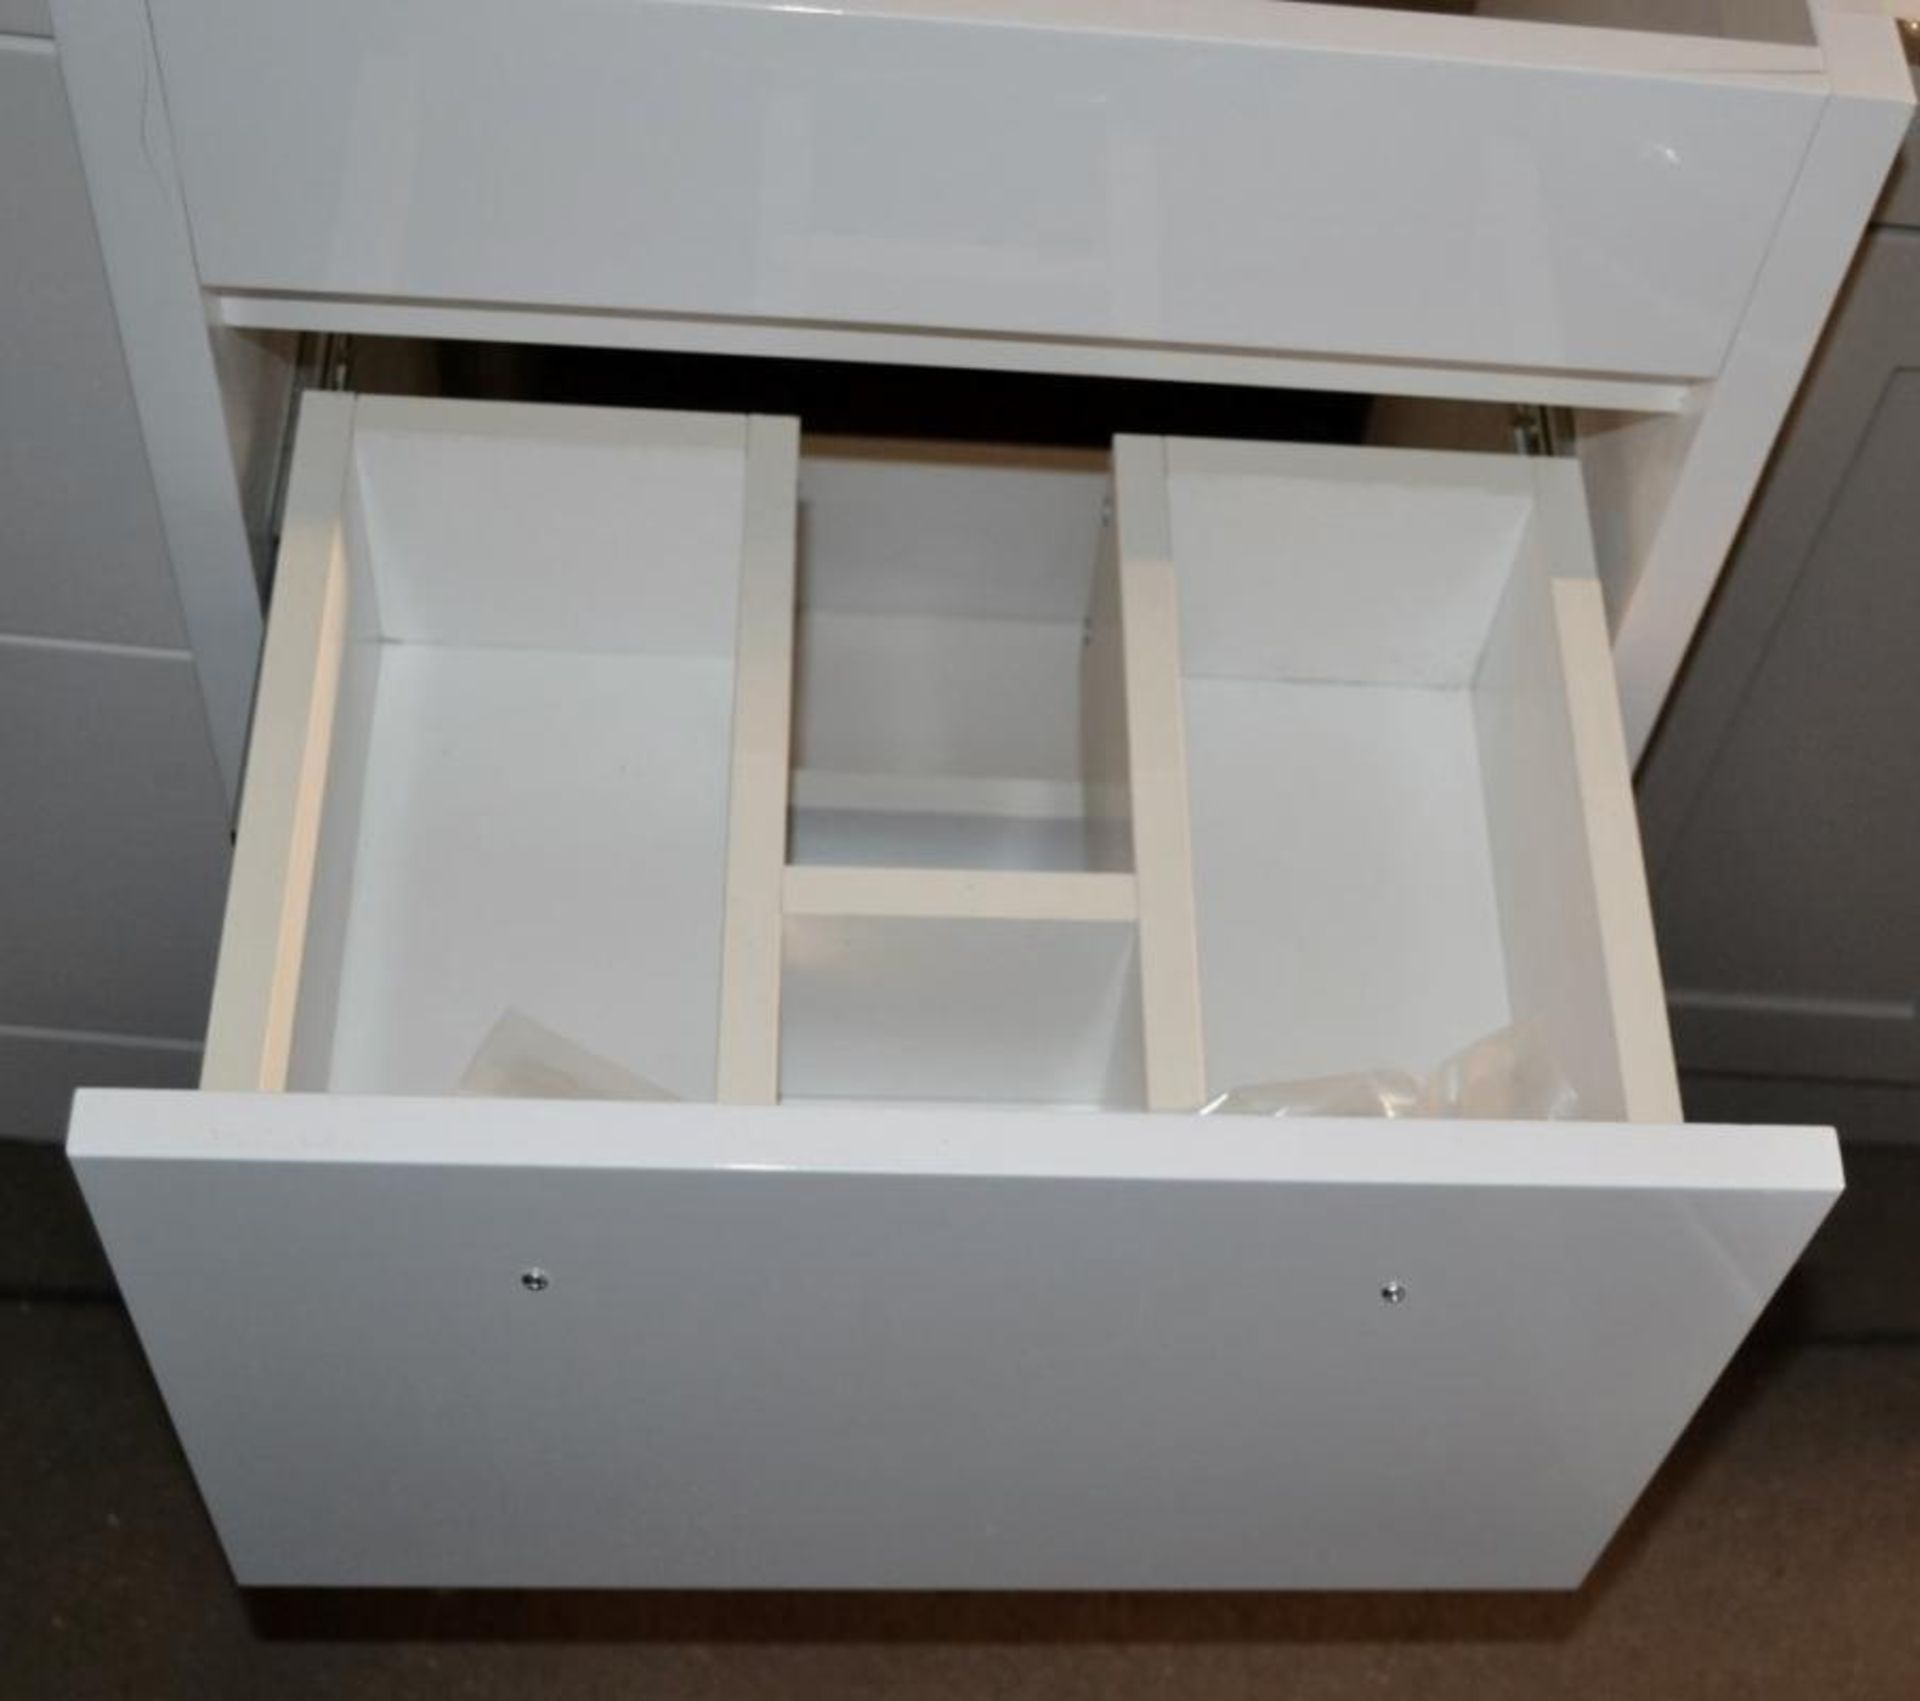 1 x Freestanding 2-Drawer Vanity Basin Unit In A Gloss White Finish - New / Unused Stock - Dimension - Image 2 of 6